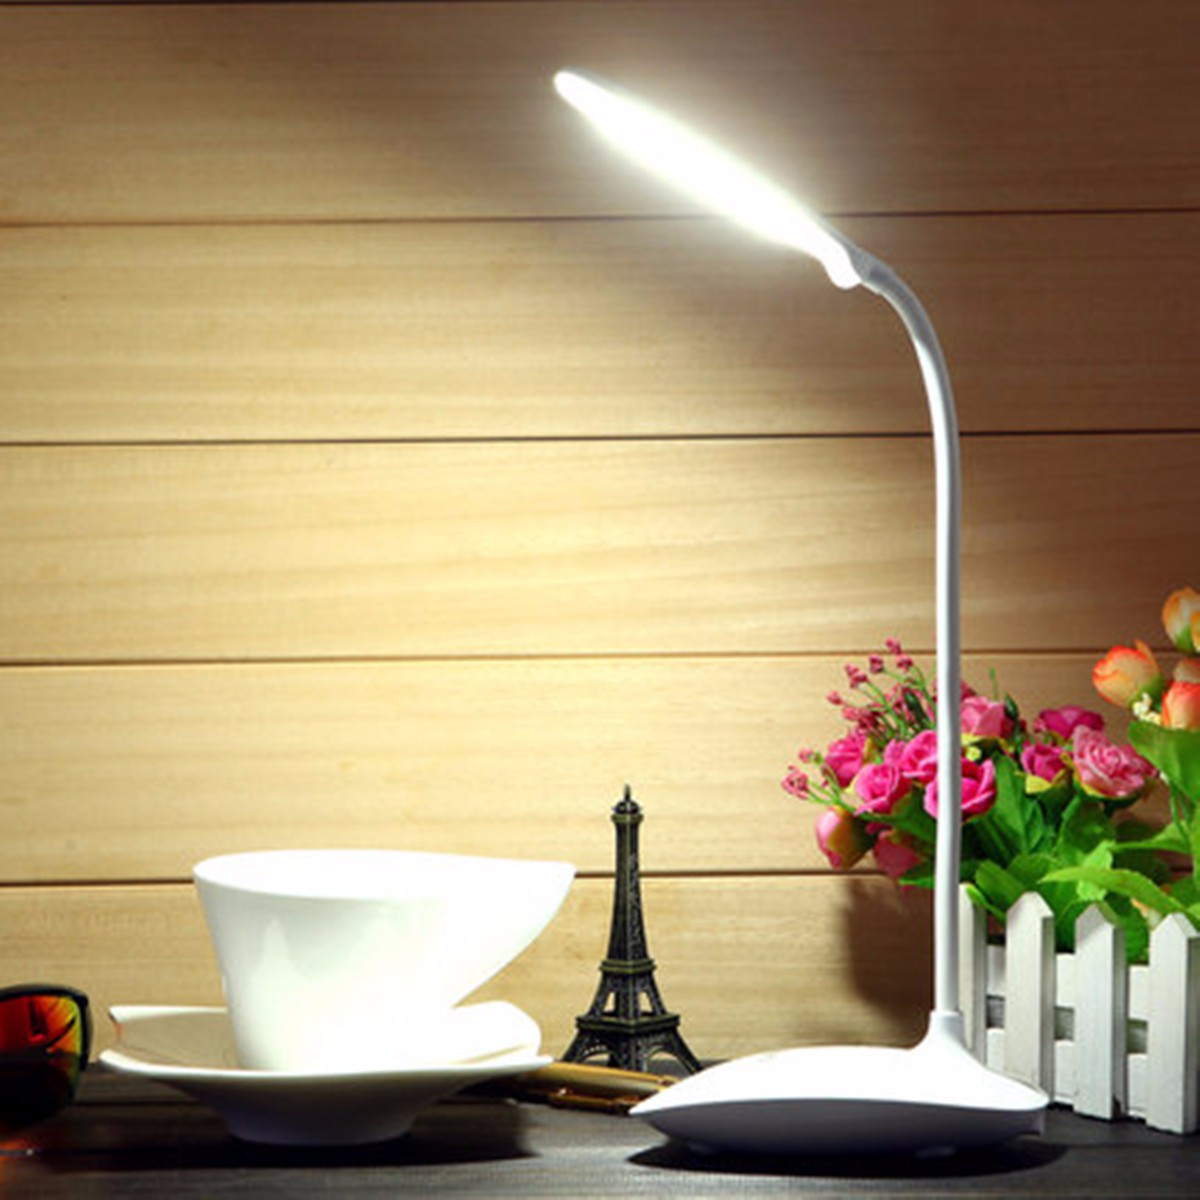 Flexible-Rechargeable-Dimmable-USB-LED-Night-Light-Bedside-Desktop-Reading-Table-Lamp-1118136-1